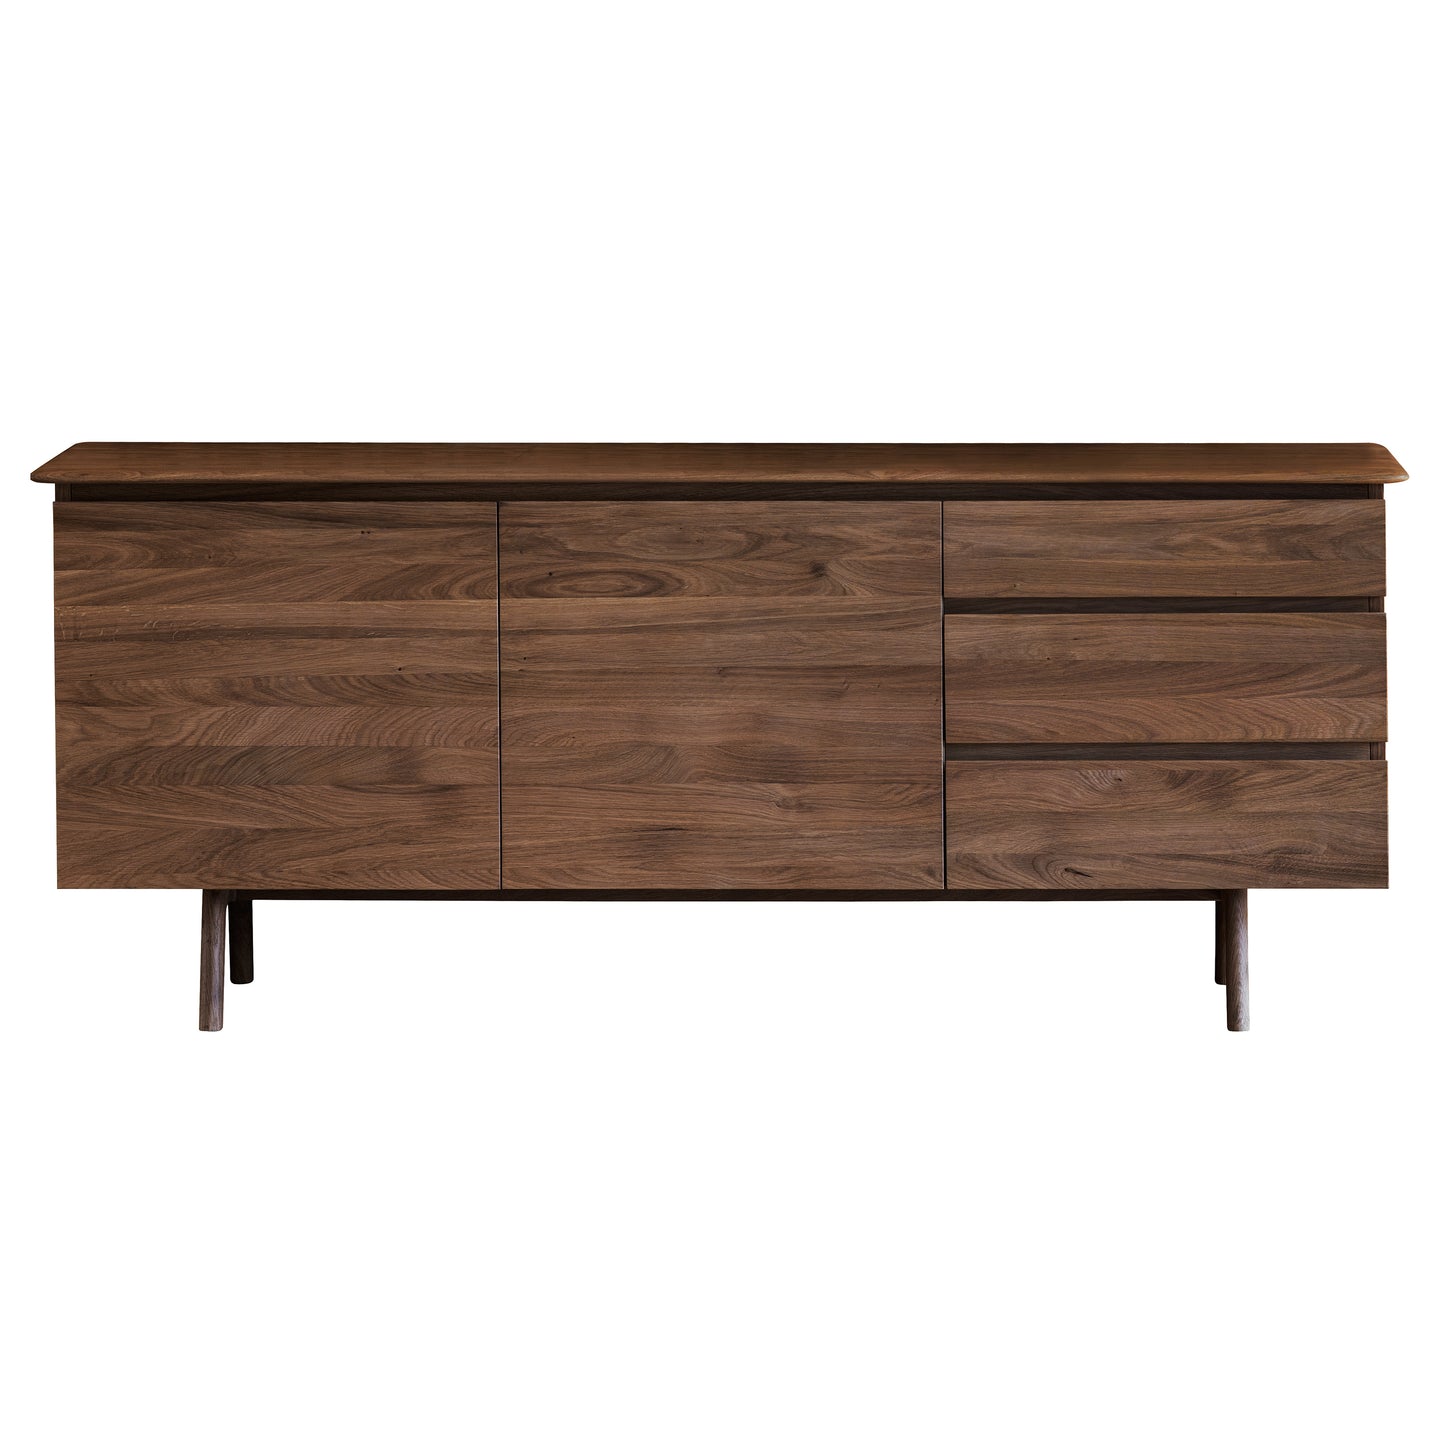 A Walnut 2 Dr/3 Drwr Sideboard by Kikiathome.co.uk, perfect for home furniture and interior decor.